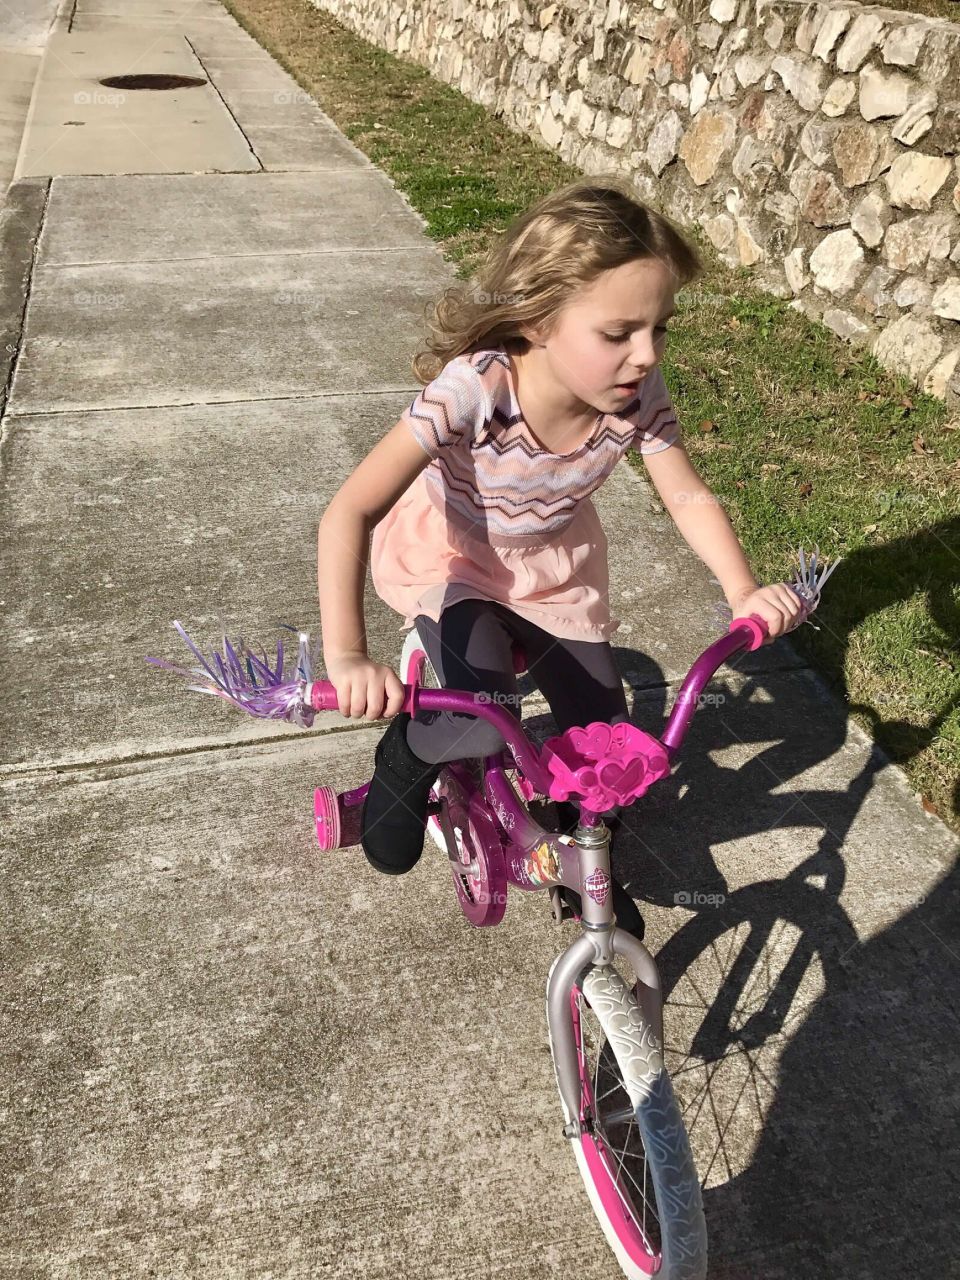 My daughter riding her bike on her own 